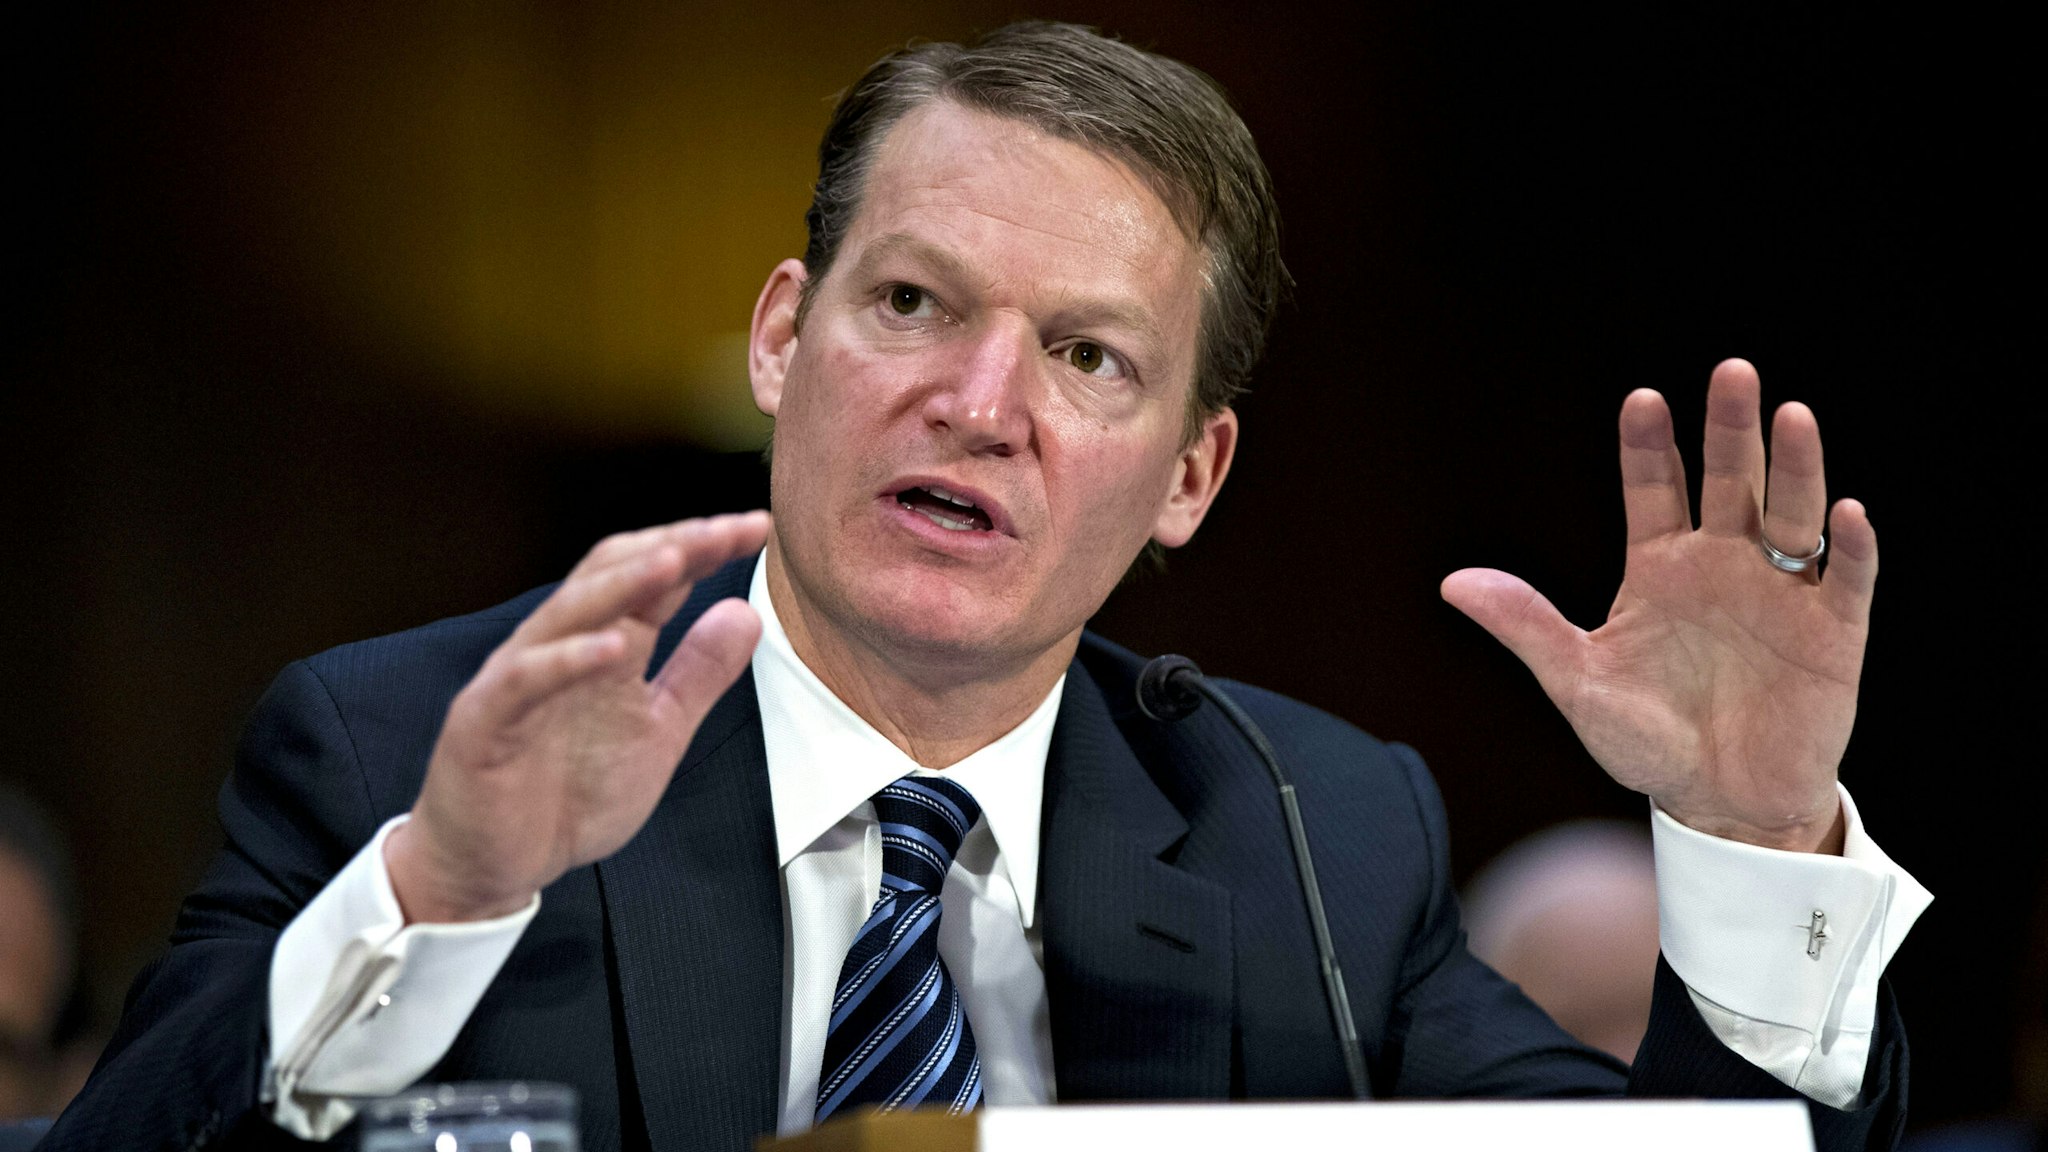 Kevin Mandia, chief executive officer of FireEye Inc., speaks during a Senate Intelligence Committee hearing in Washington, D.C., U.S., on Thursday, March 30, 2017. Leaders of the committee promised a thorough and impartial investigation into Russian meddling in the U.S. presidential election at the hearing, held as a House probe remained mired in partisan disputes.